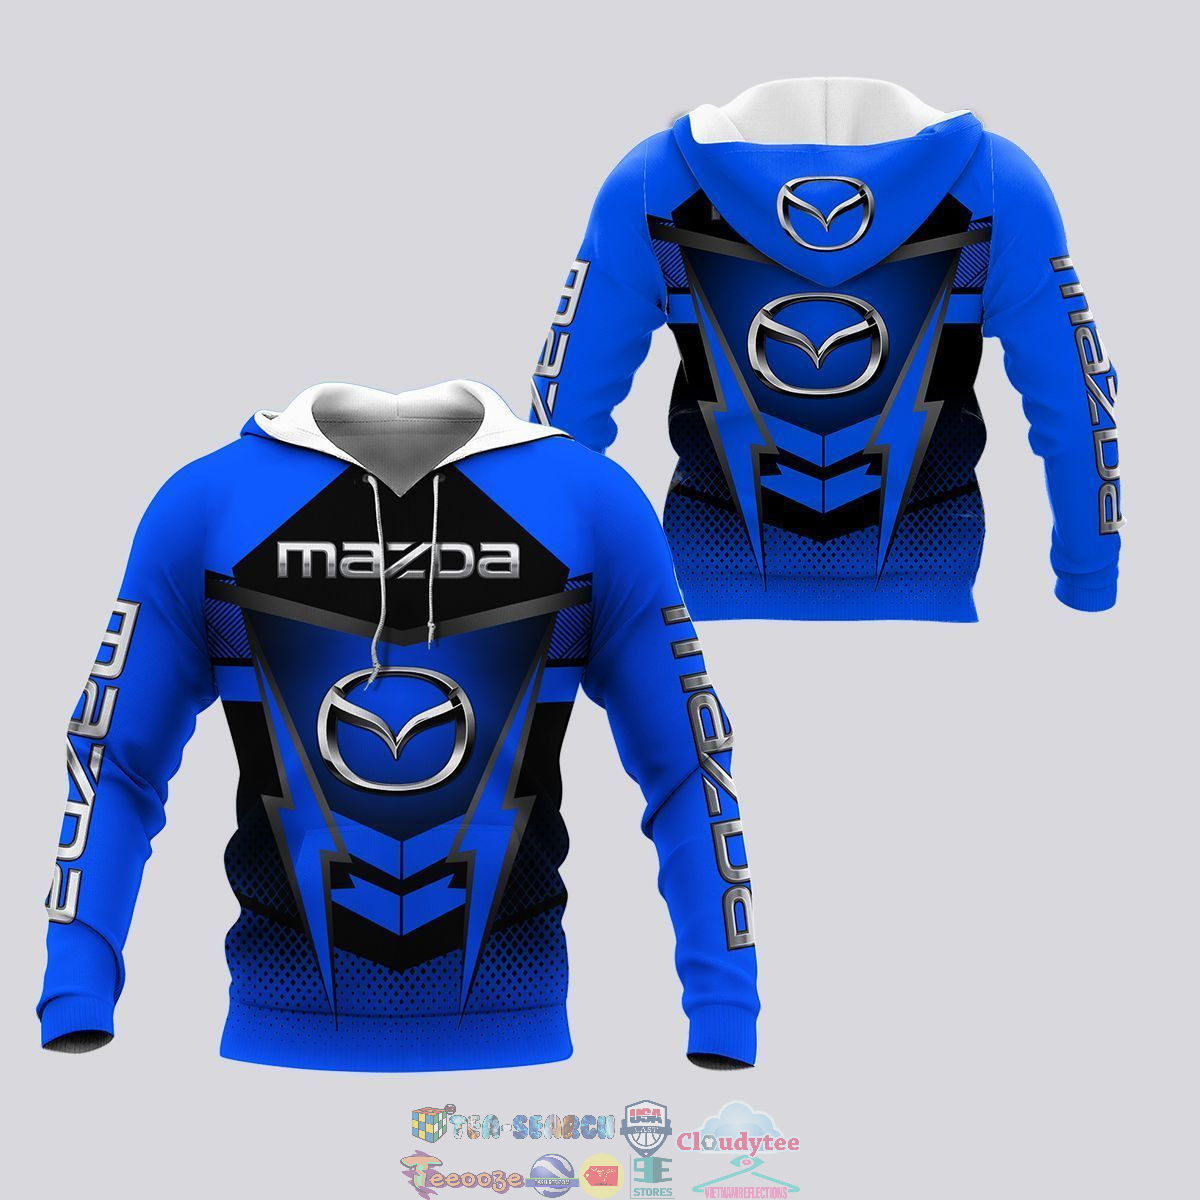 Mazda ver 9 3D hoodie and t-shirt